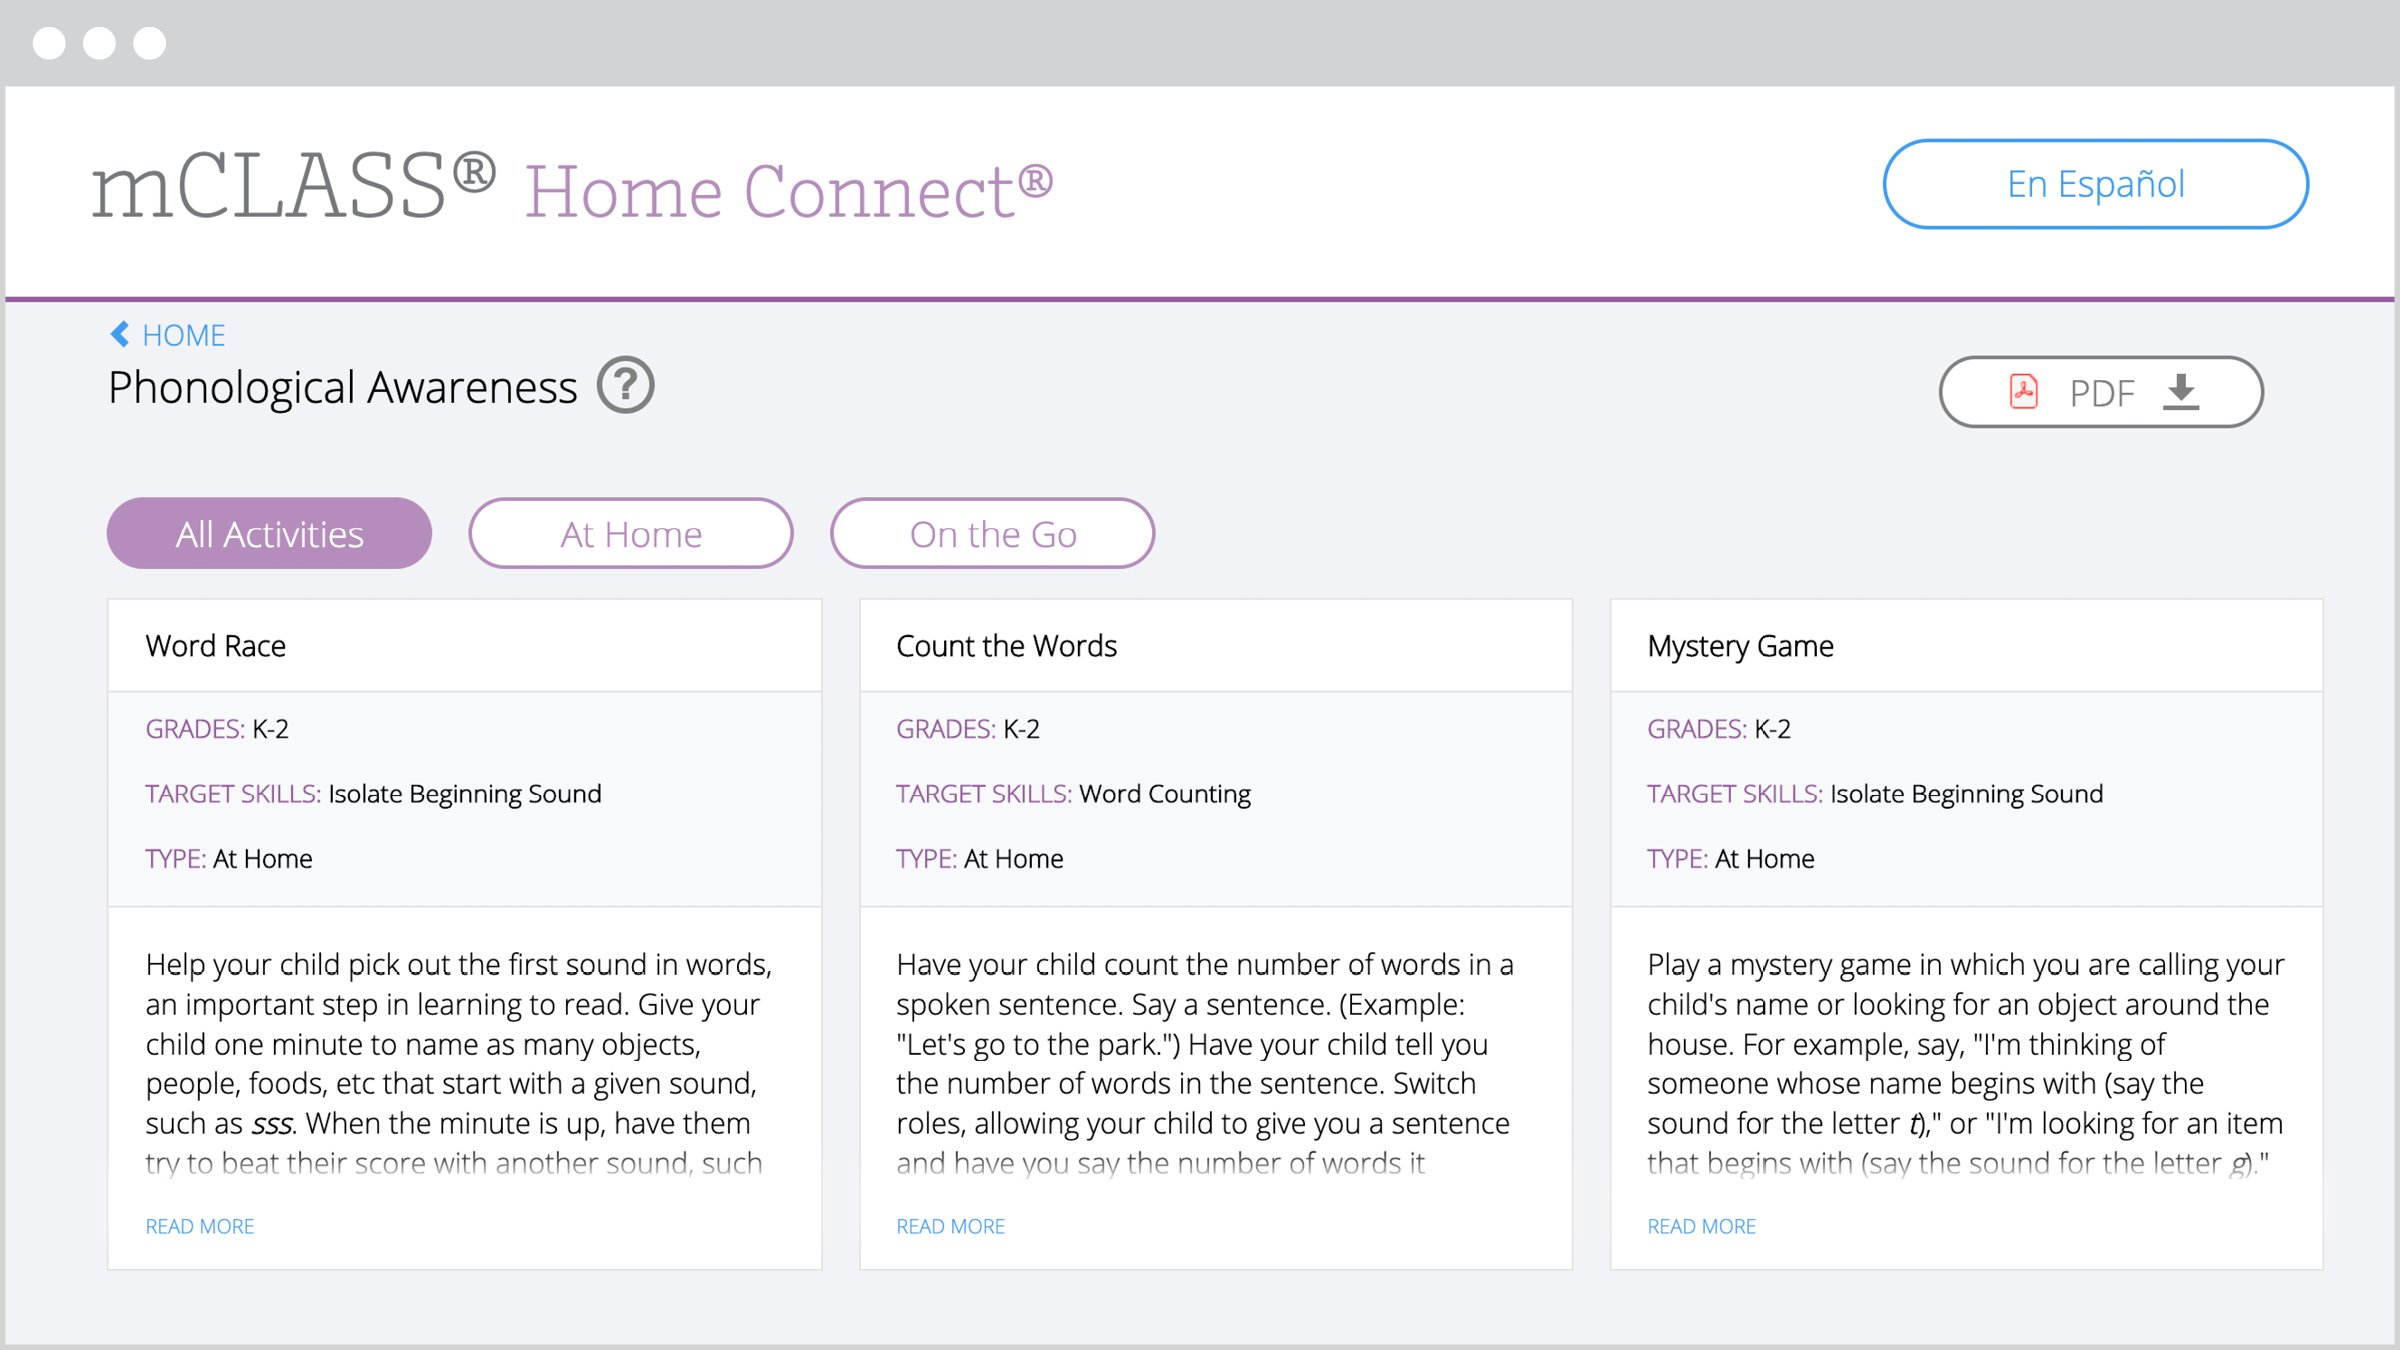 Screenshot of the mclass home awareness webpage displaying educational games and activities for children, categorized by setting and skill level.